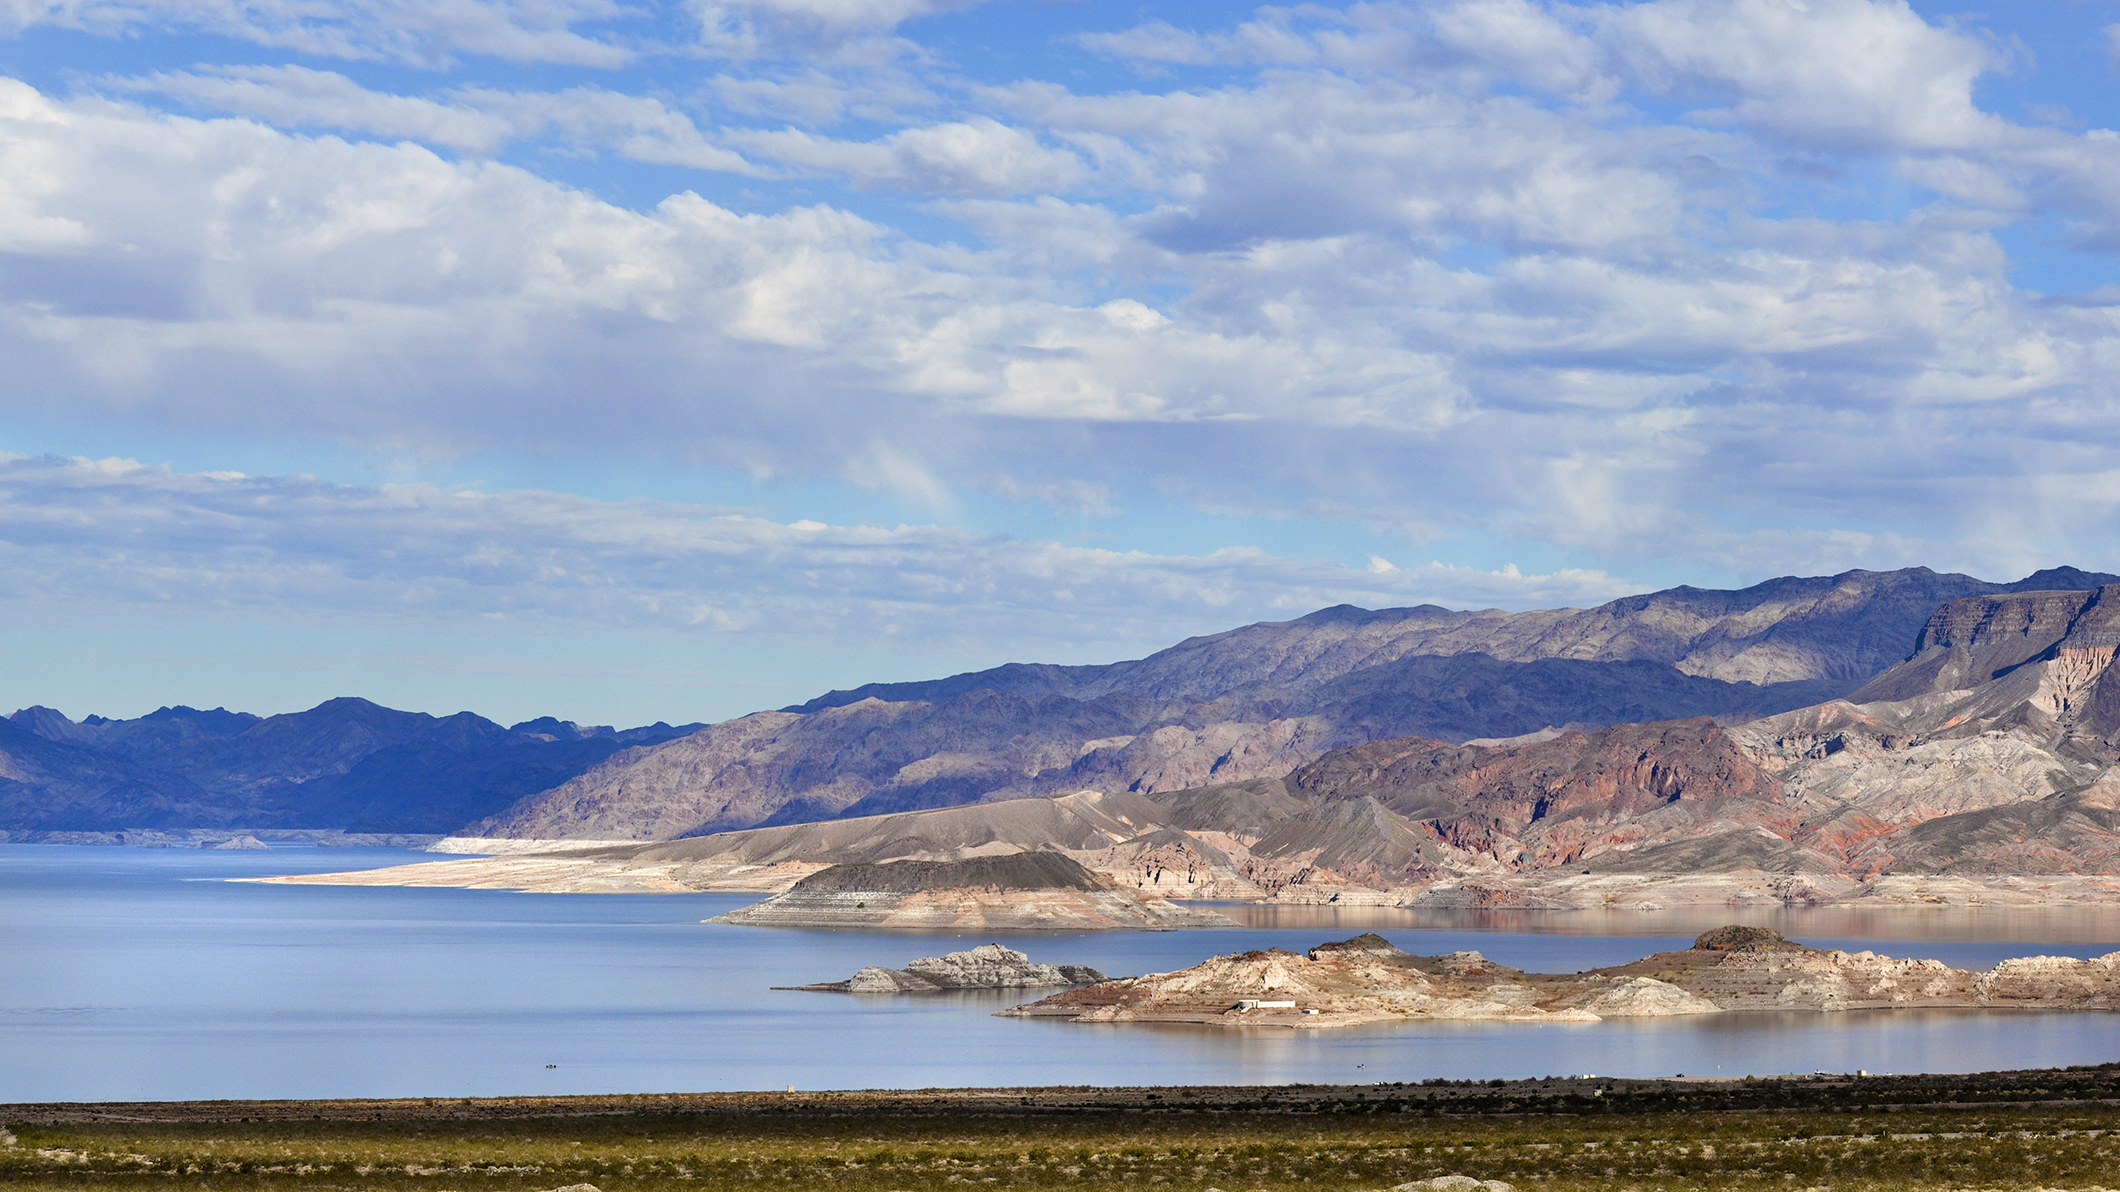 Lake Mead Rv Village Named A Top Scenic Rv Park For 2014 Lake Mead National Recreation Area U S National Park Service